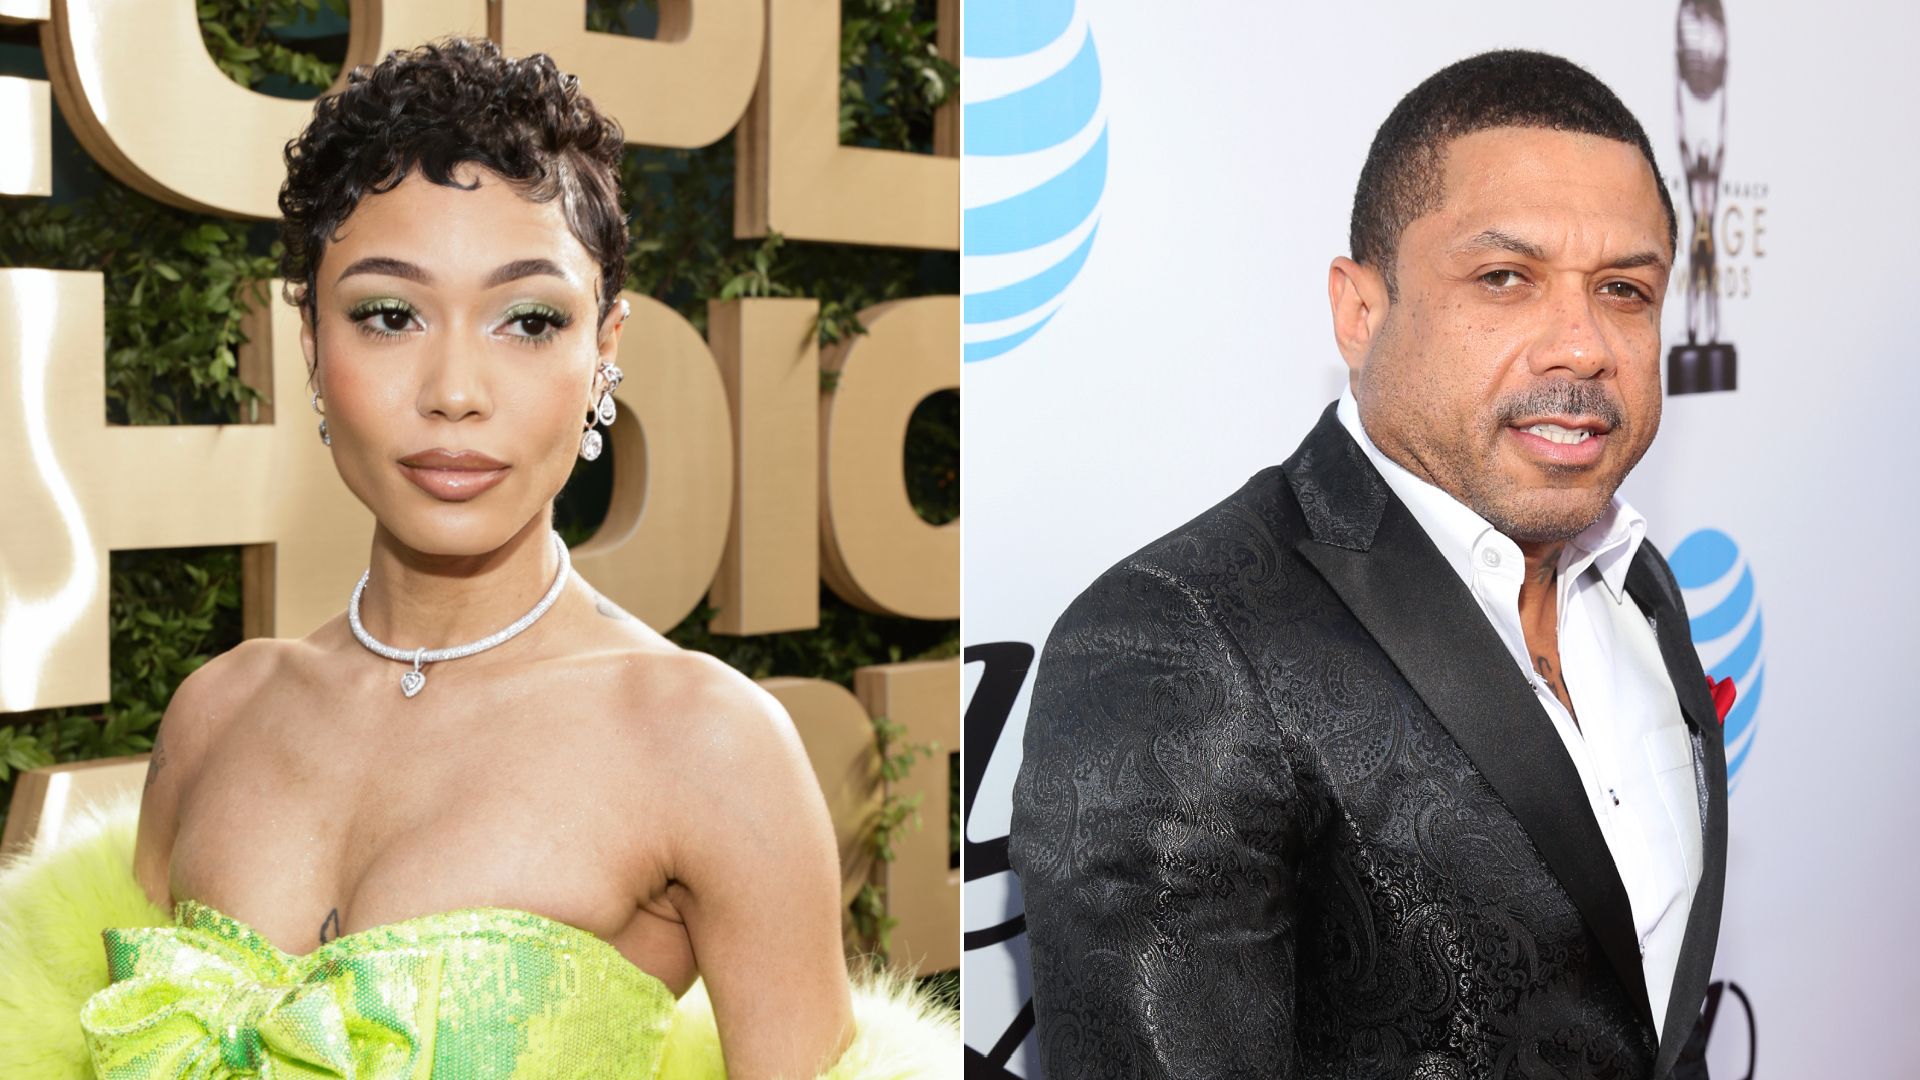 Coi Leray's famous family and feud with media mogul father Benzino explained